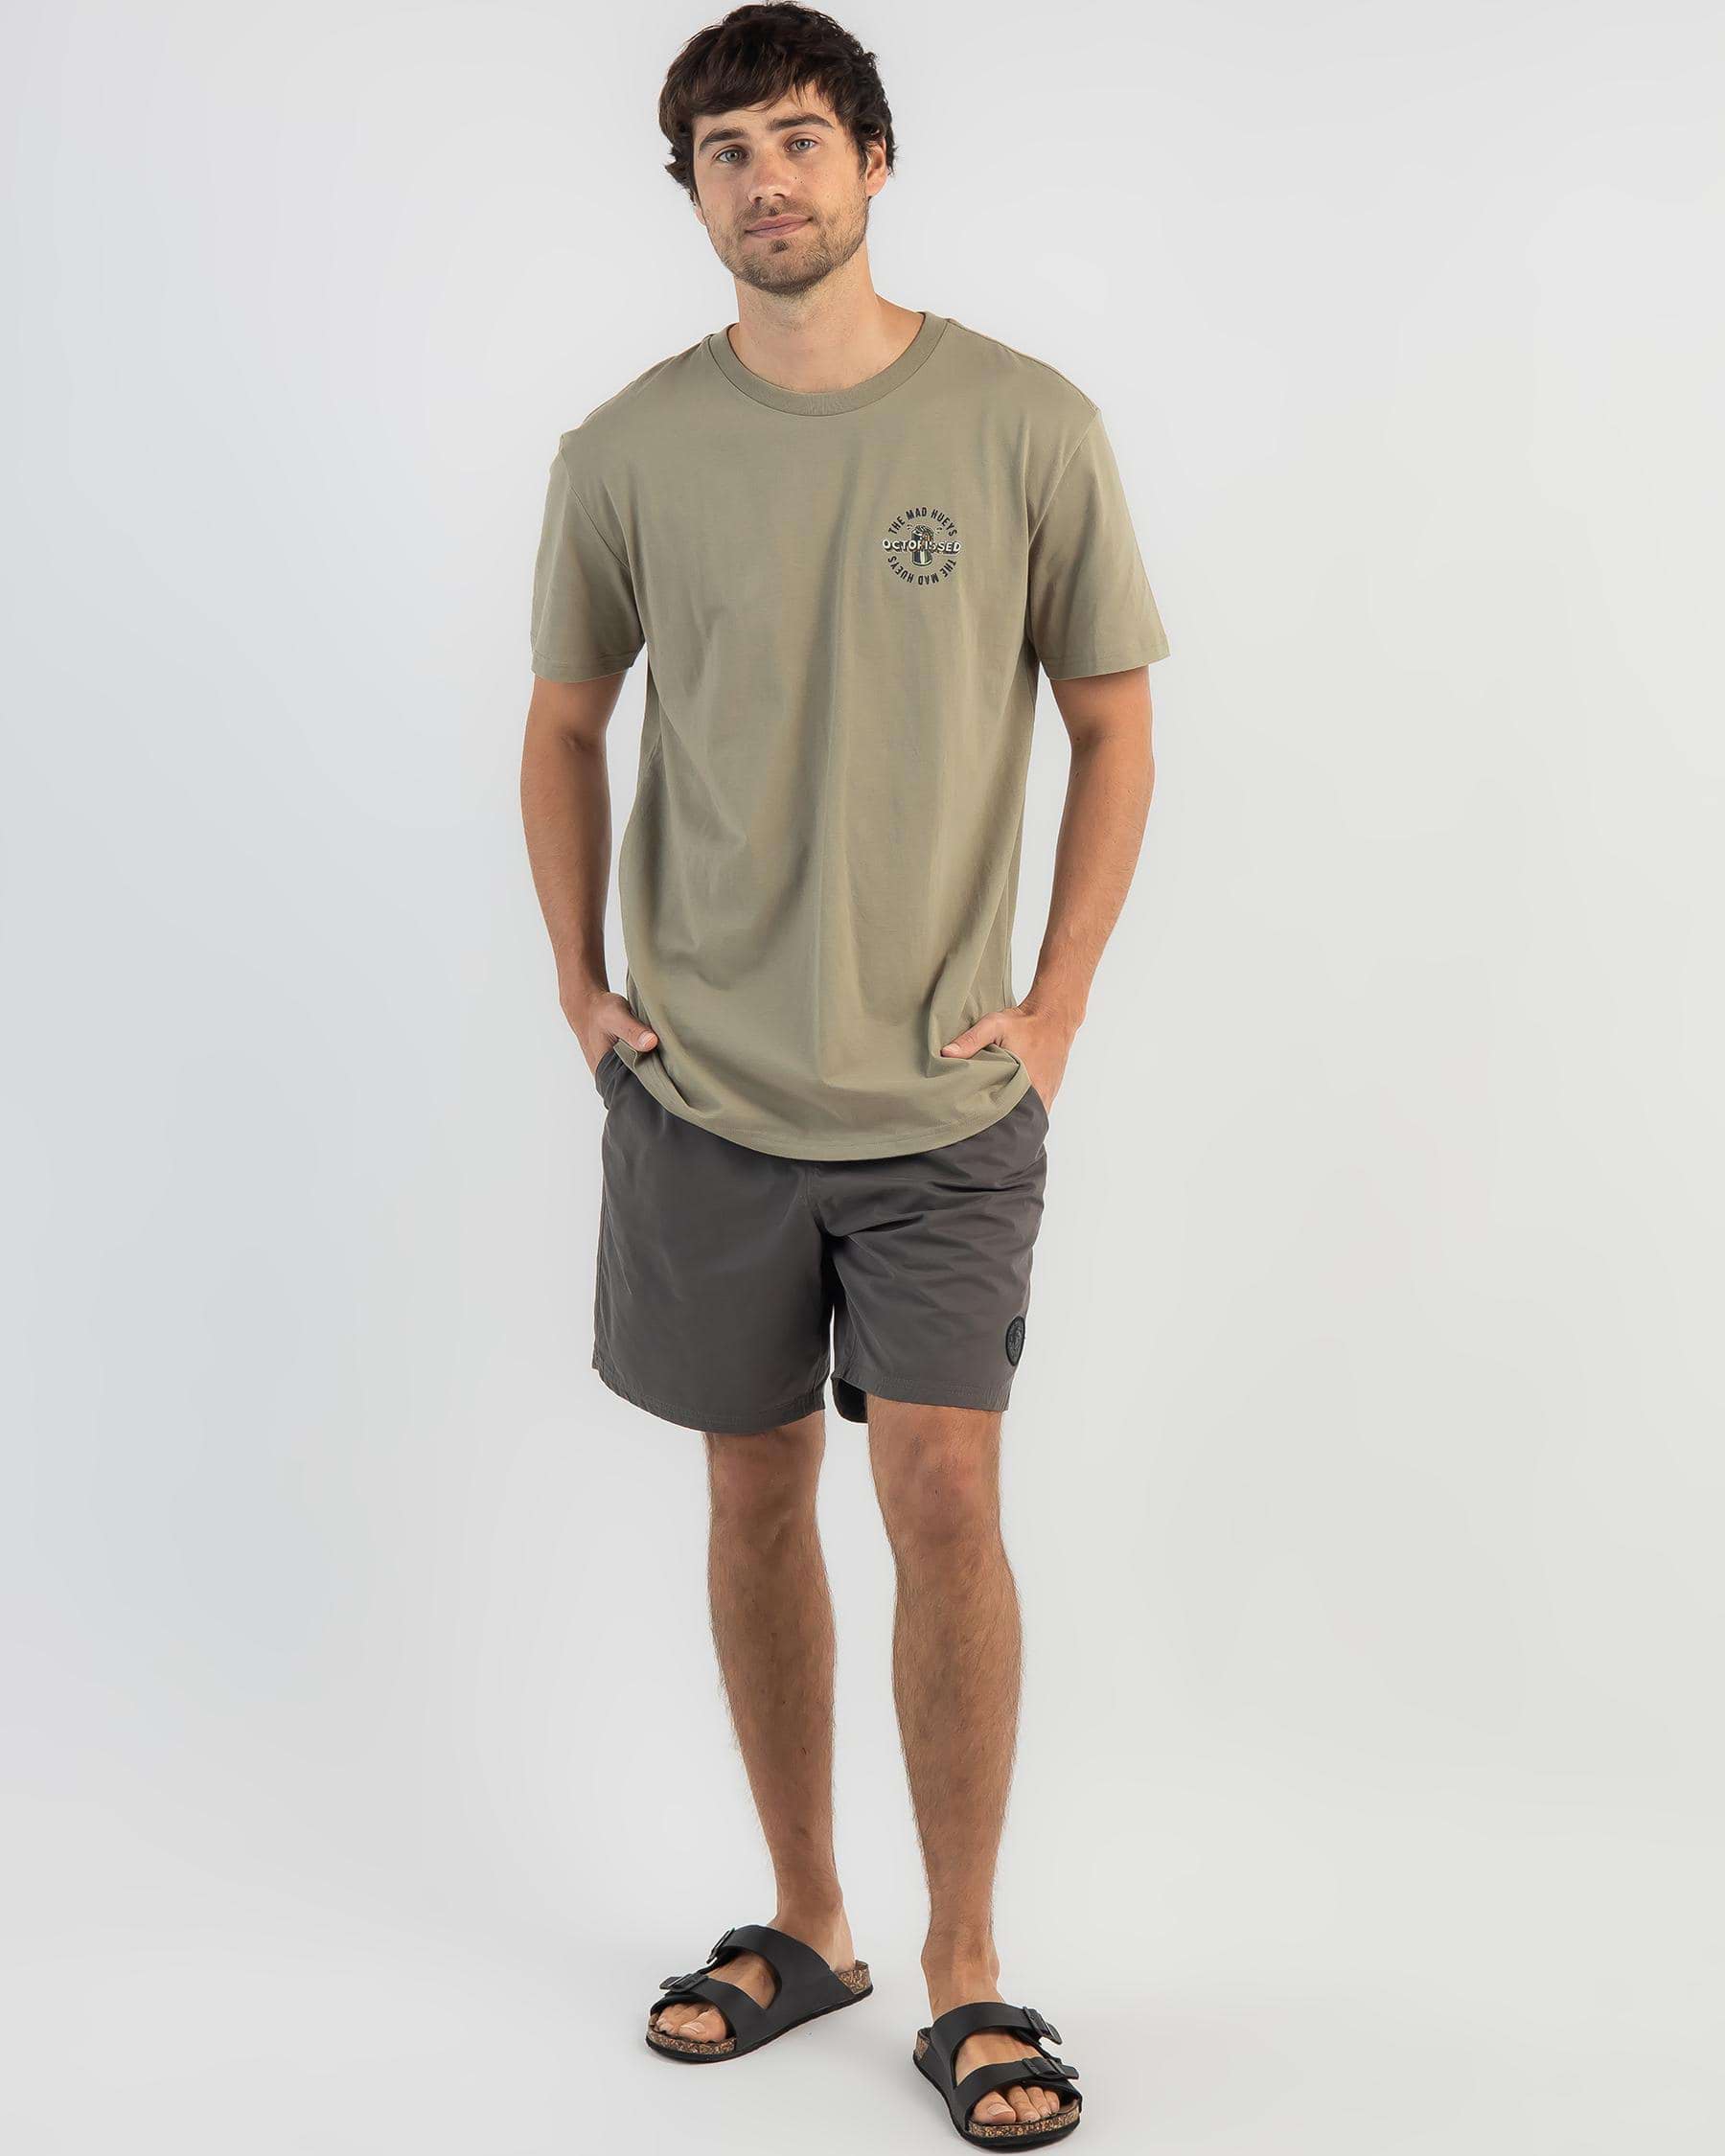 Shop The Mad Hueys Octopissed T-Shirt In Khaki - Fast Shipping & Easy ...